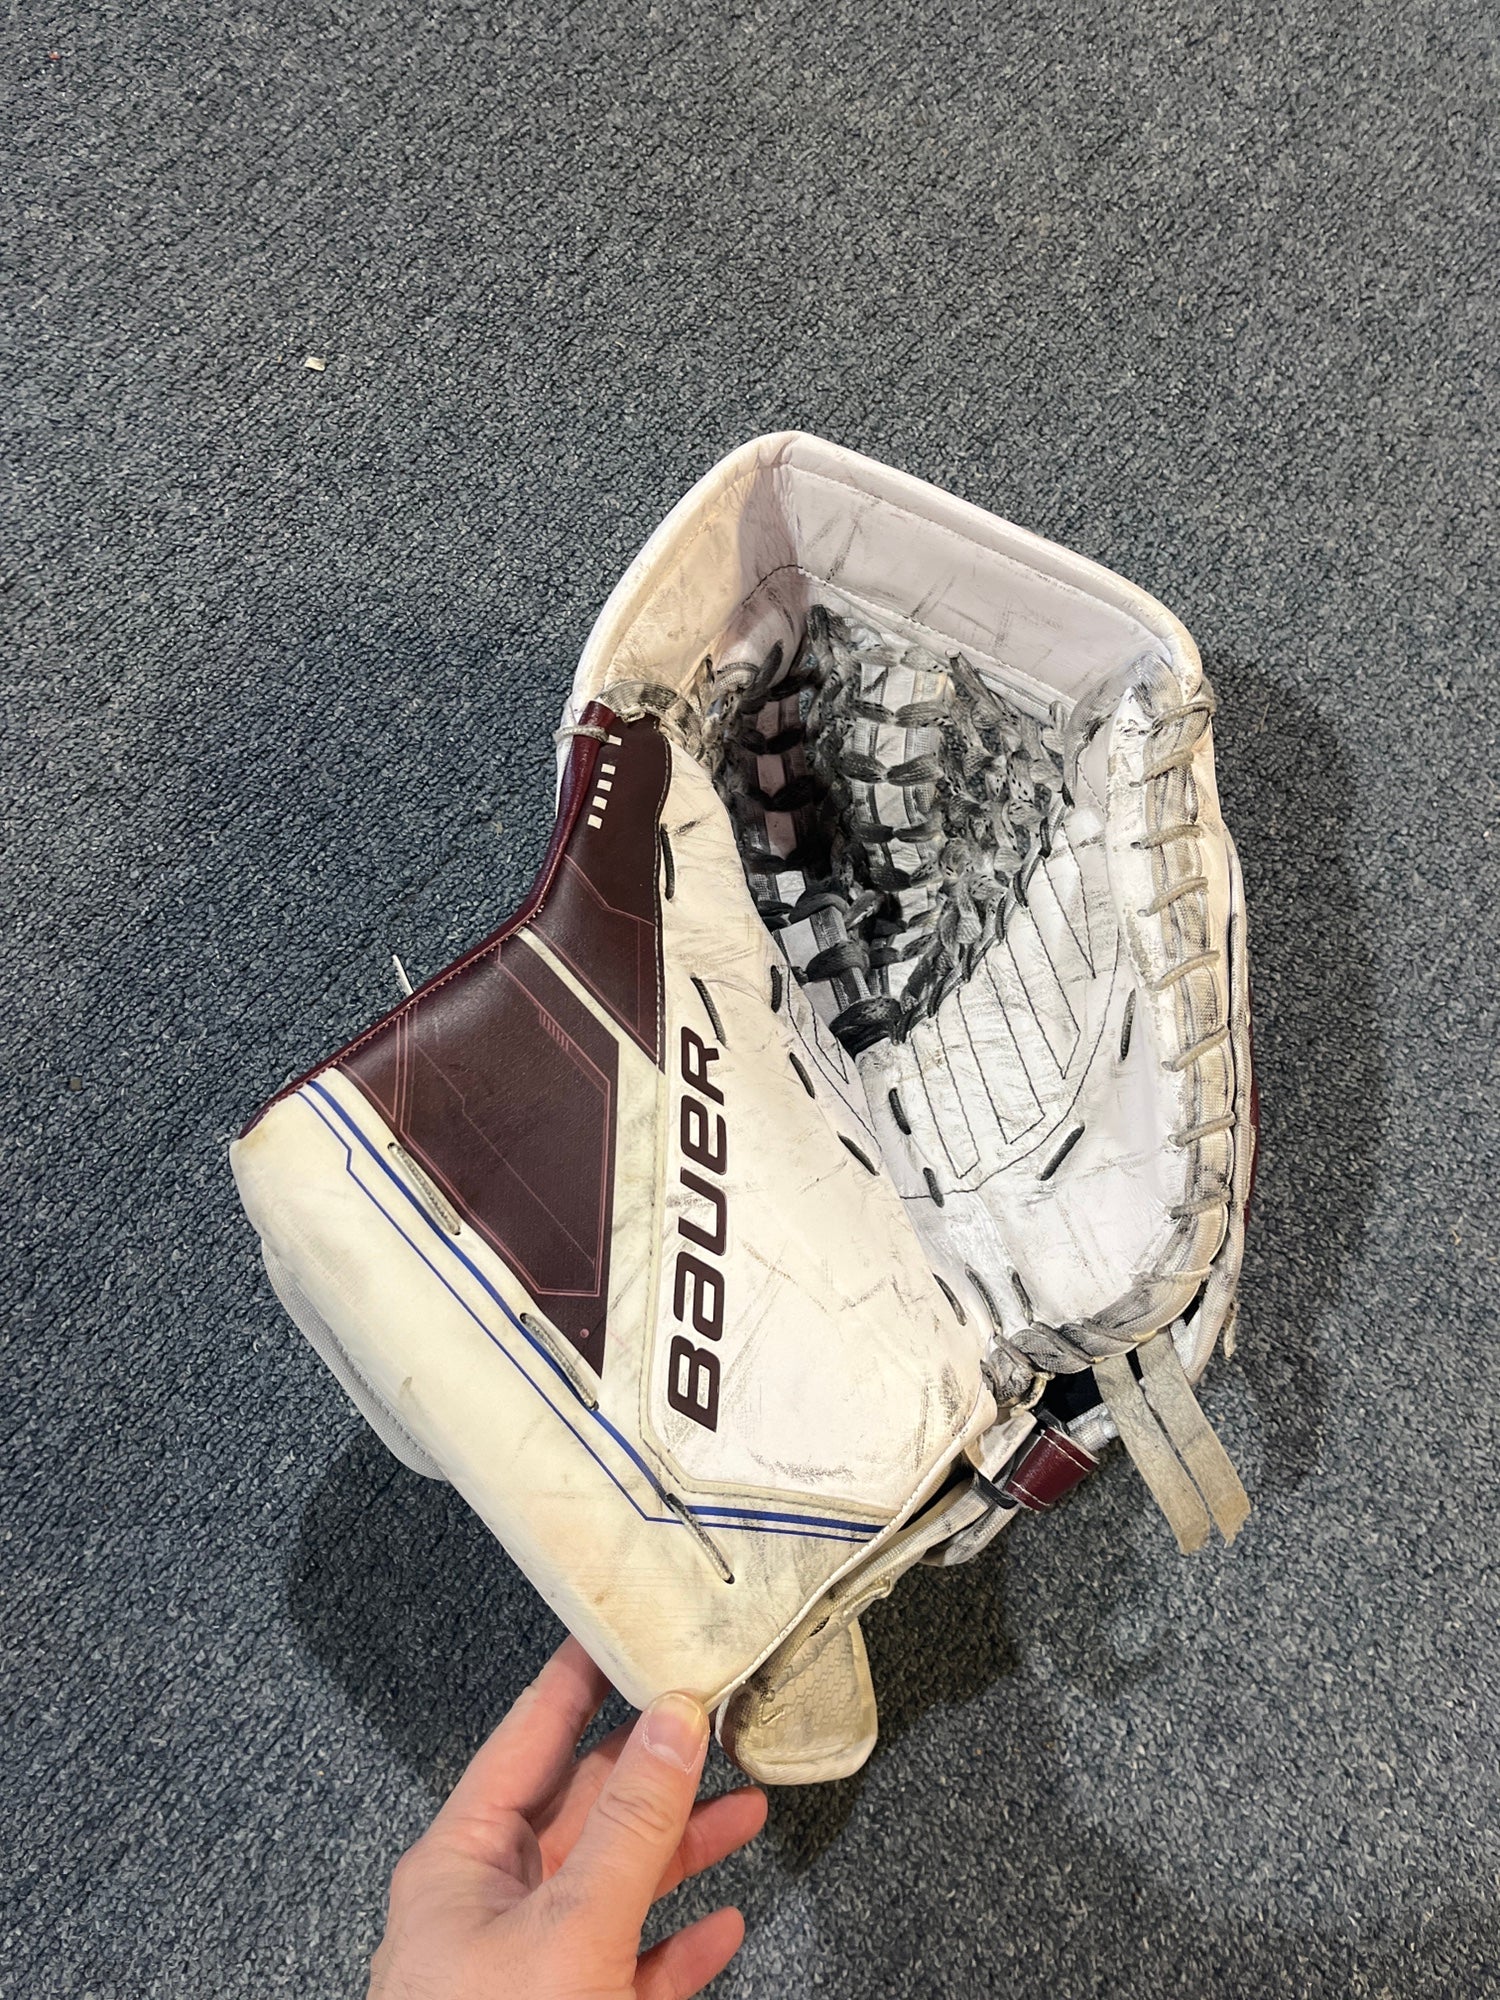 Colorado Avalanche Game Used Pro Stock Bauer Mach Glove and Blocker Miner  #1